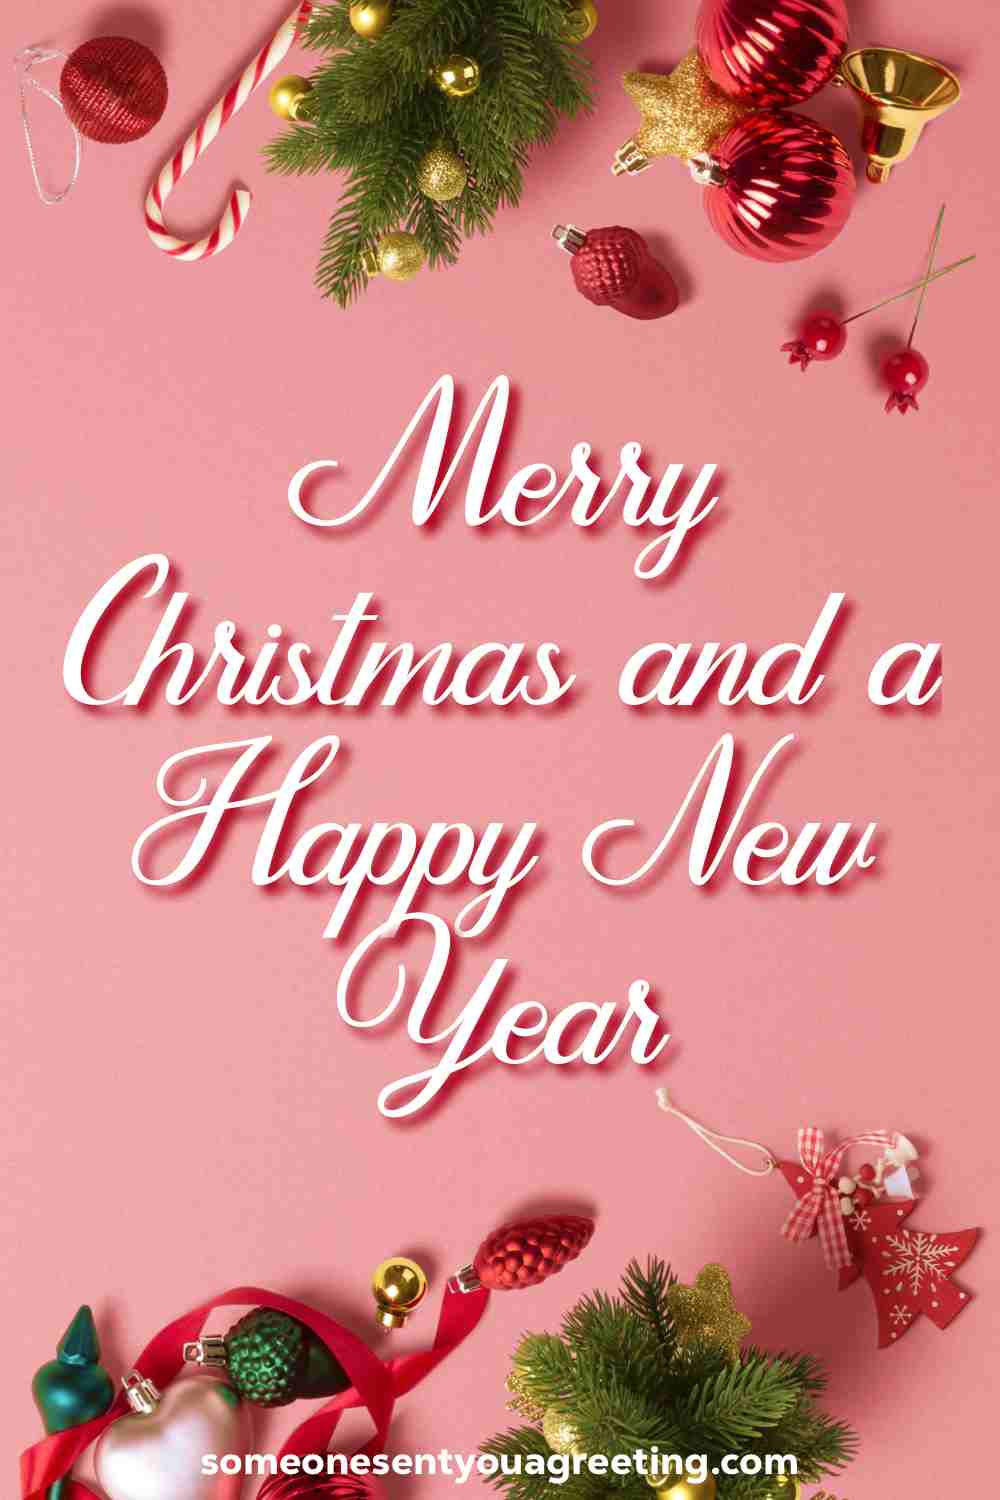 Merry Christmas message for Facebook